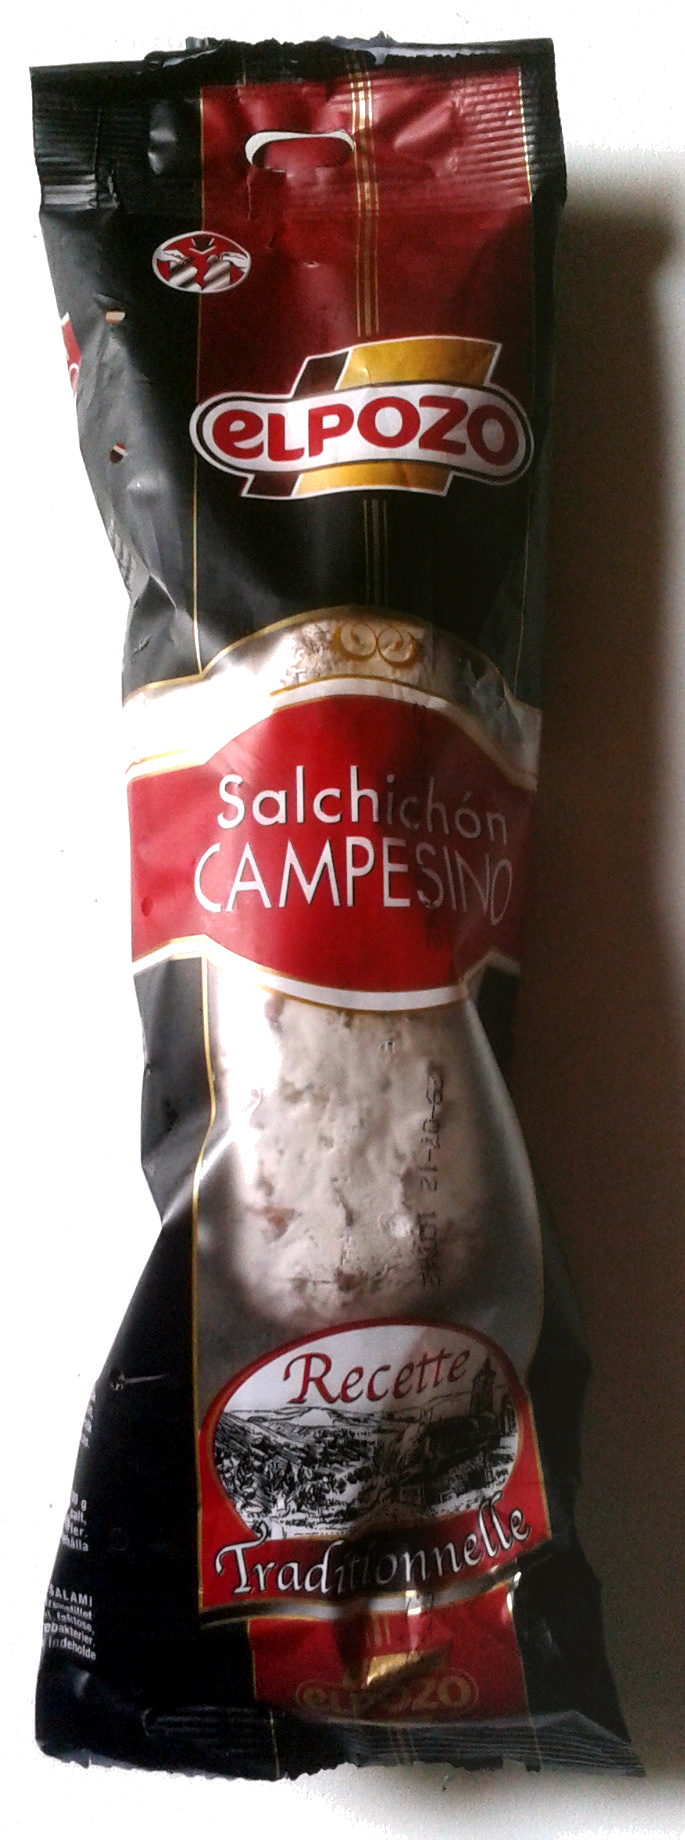 Salsichon campesimo - Product - fr